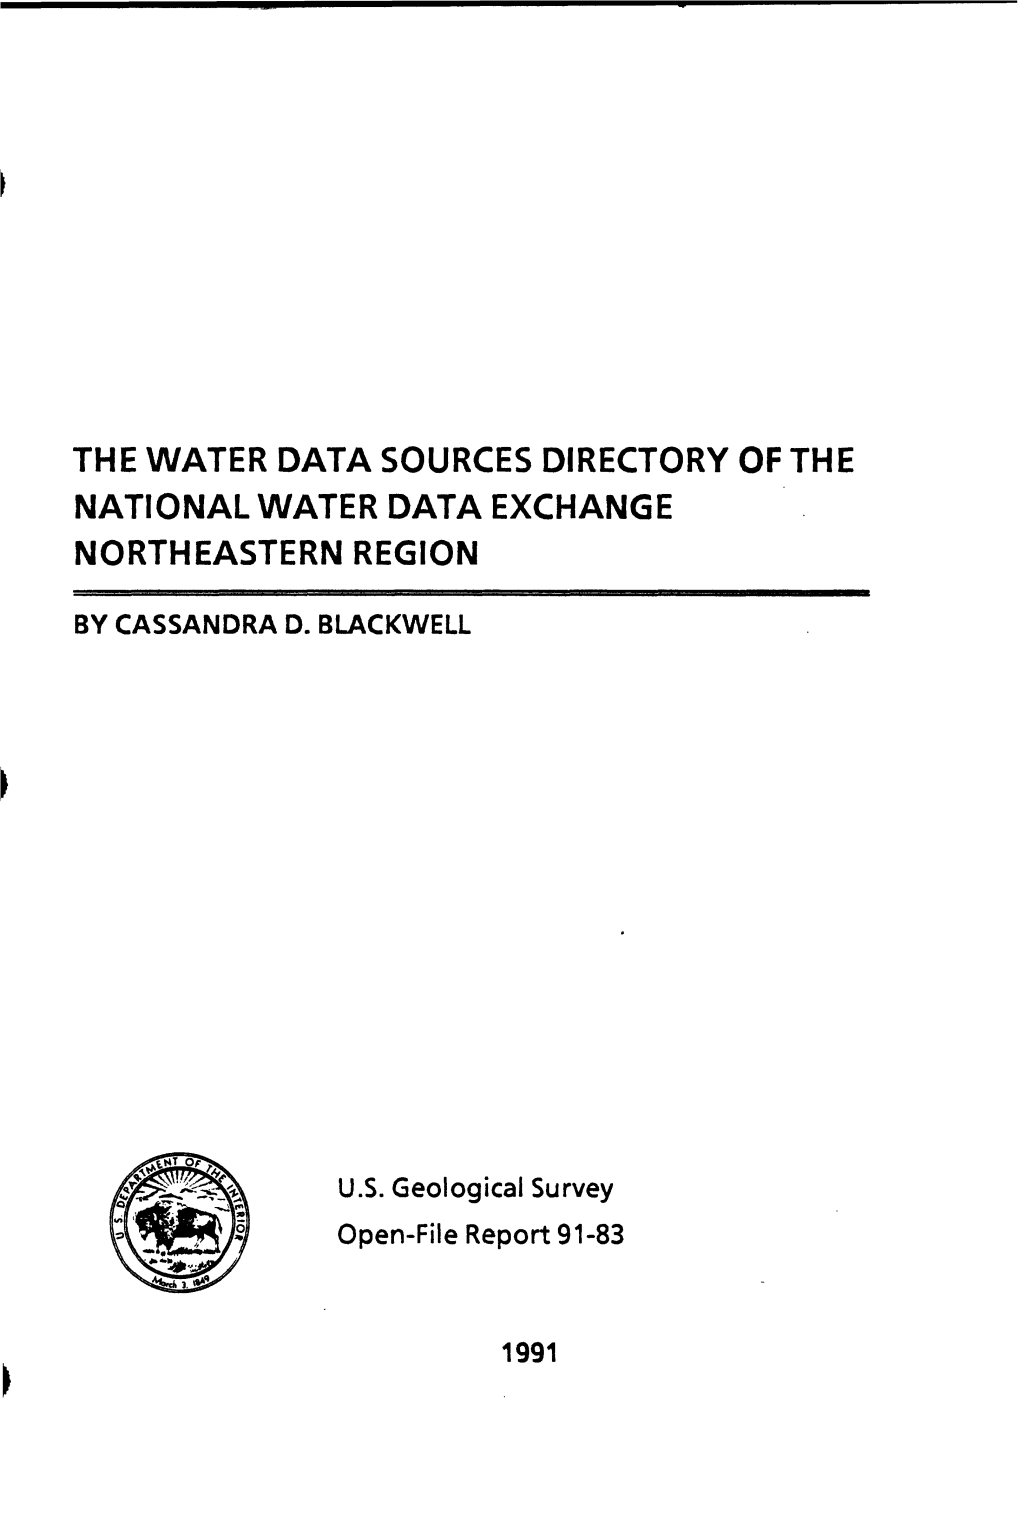 The Water Data Sources Directory of the National Water Data Exchange Northeastern Region